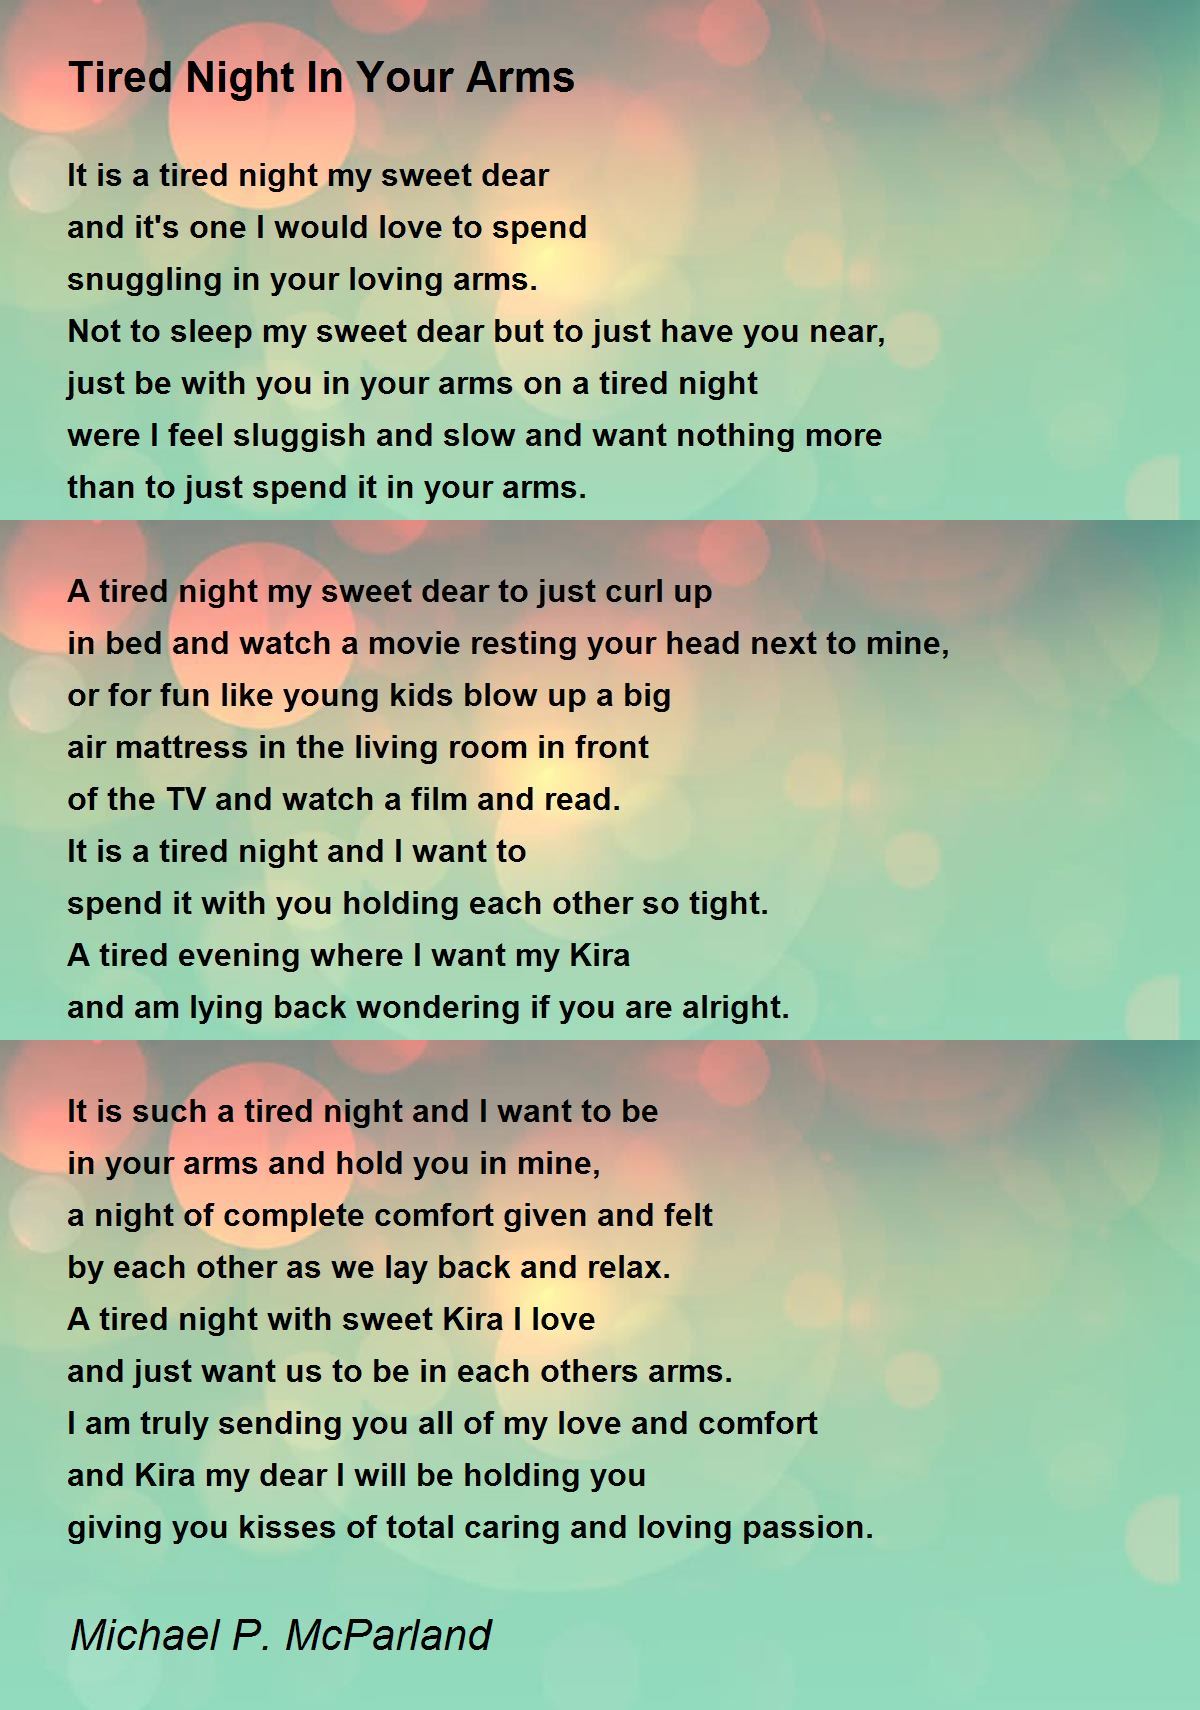 Spending The Night With You - Spending The Night With You Poem by Michael  P. McParland